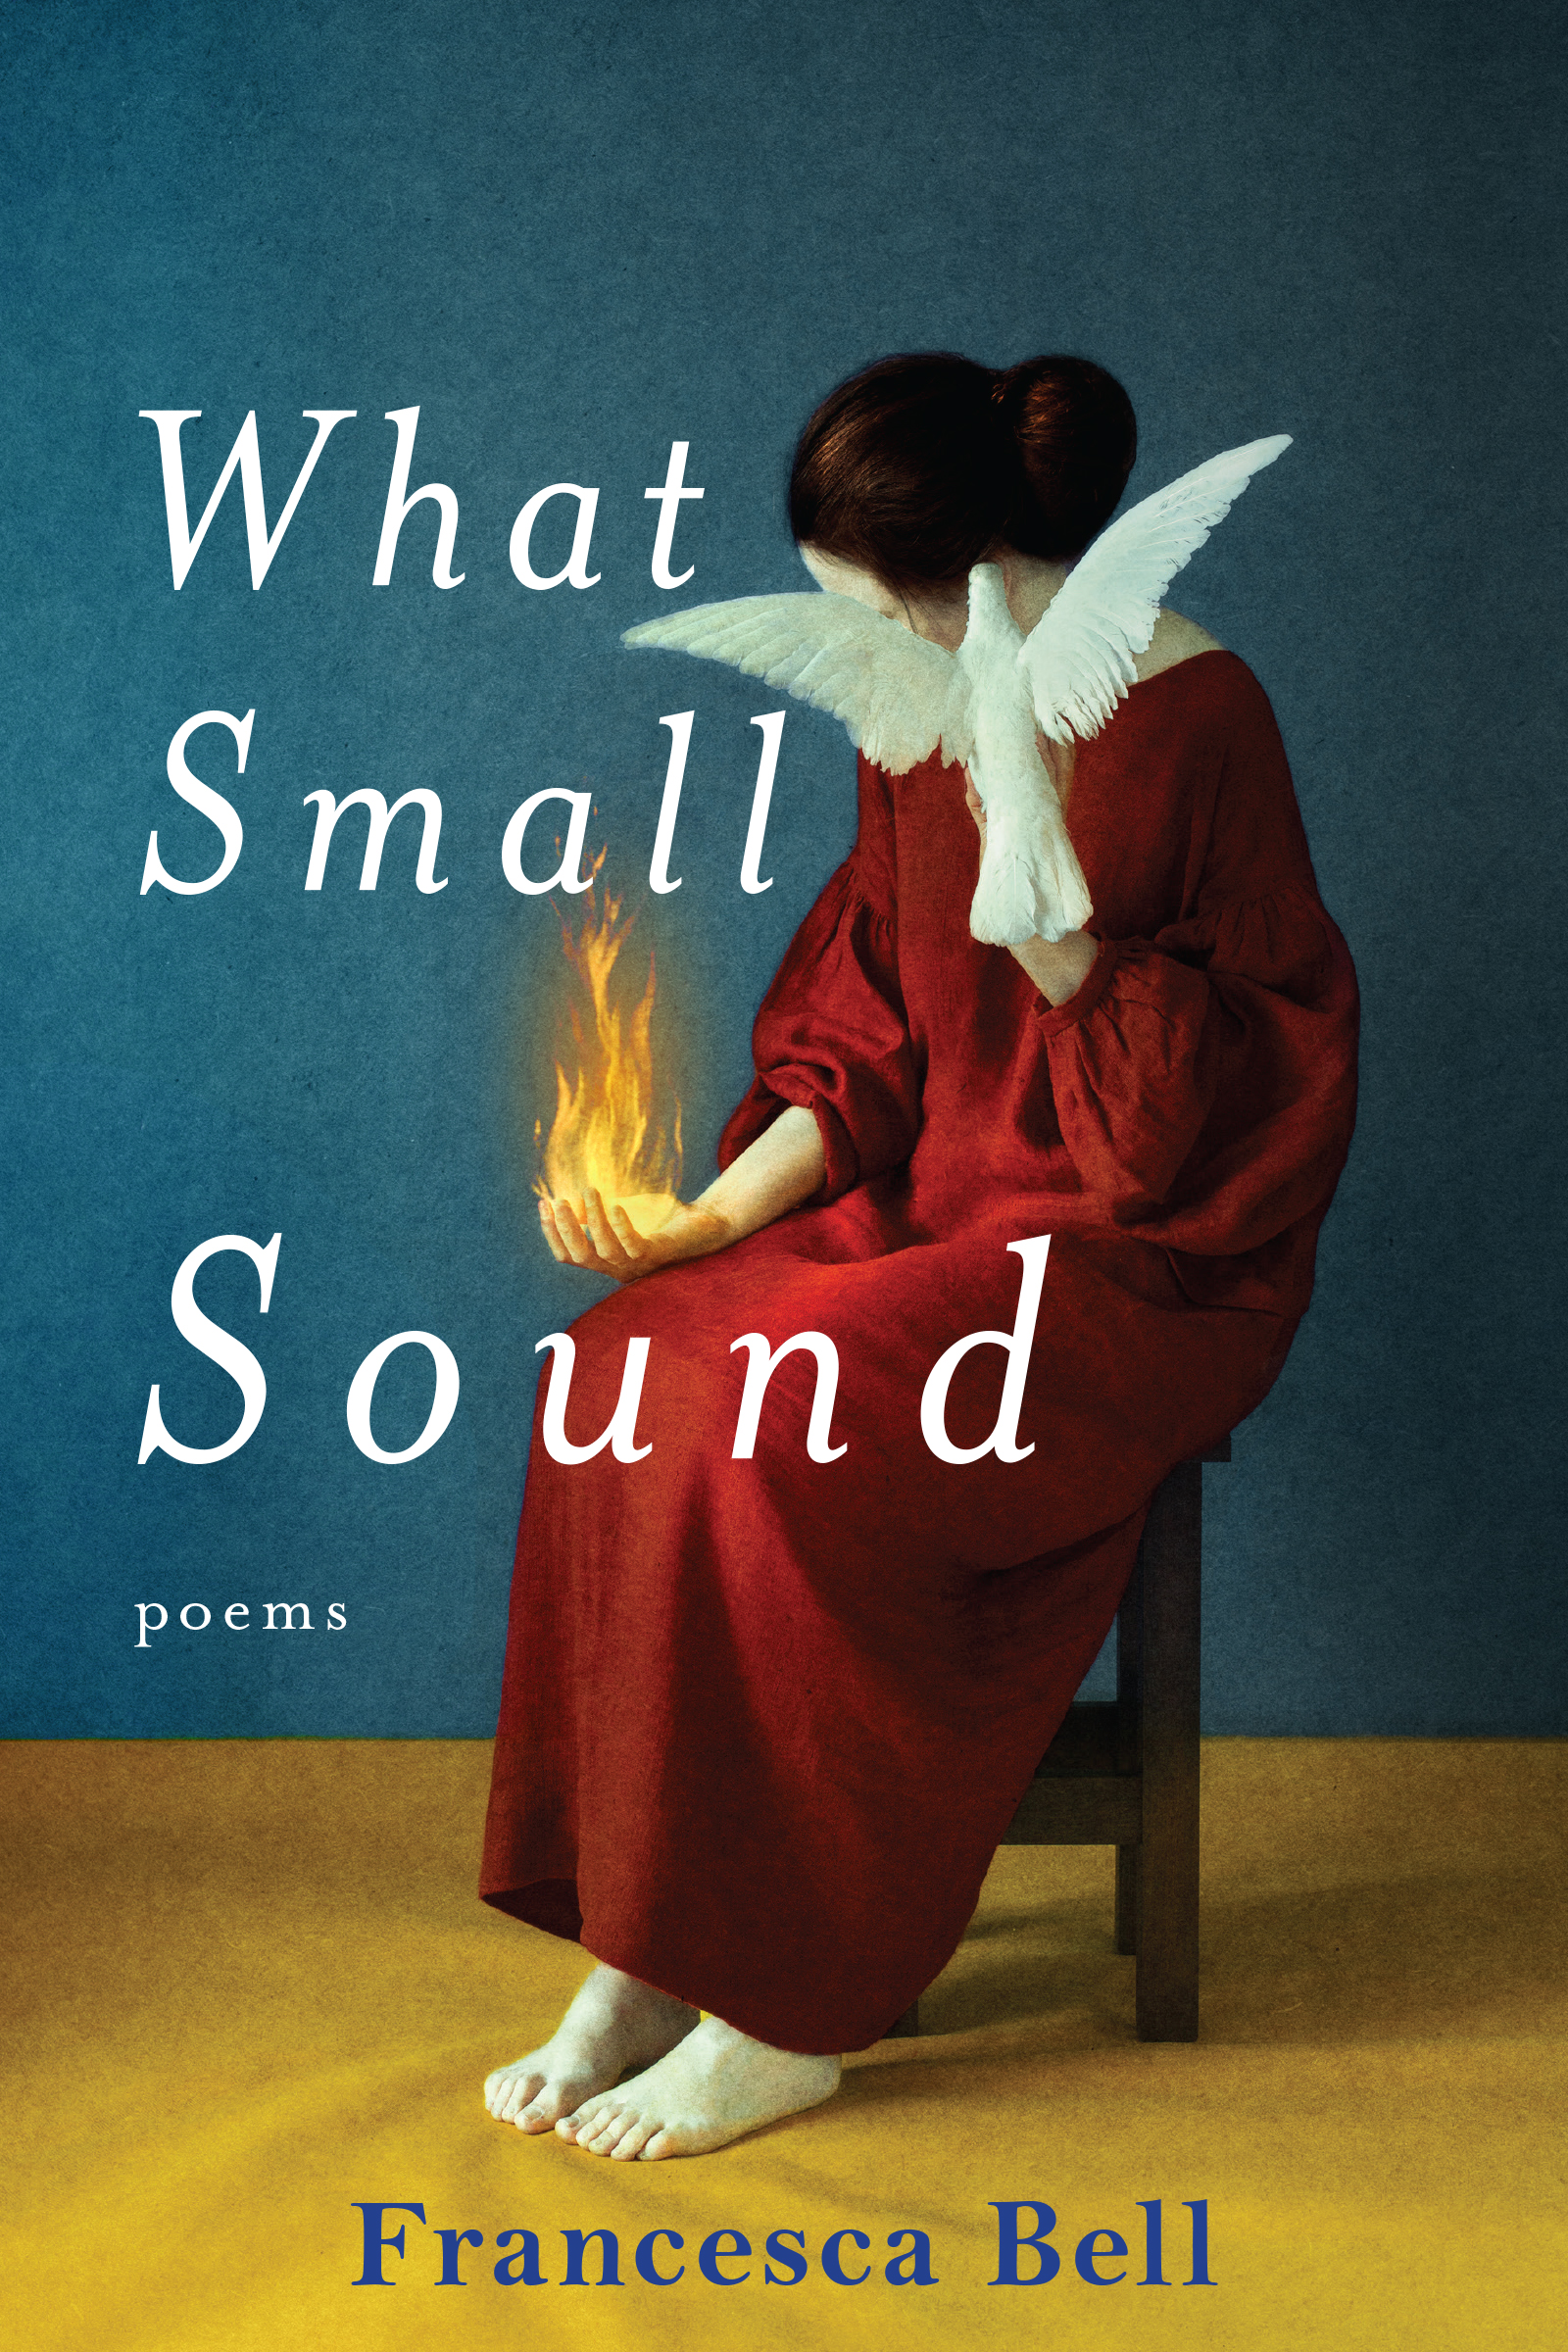 A white lady with brown hair in a bun in a red dress sits in a wooden chair. Her hand is on fire and a white bird is covering her face. beside her reads the title What Small Sound by Francesca Bell